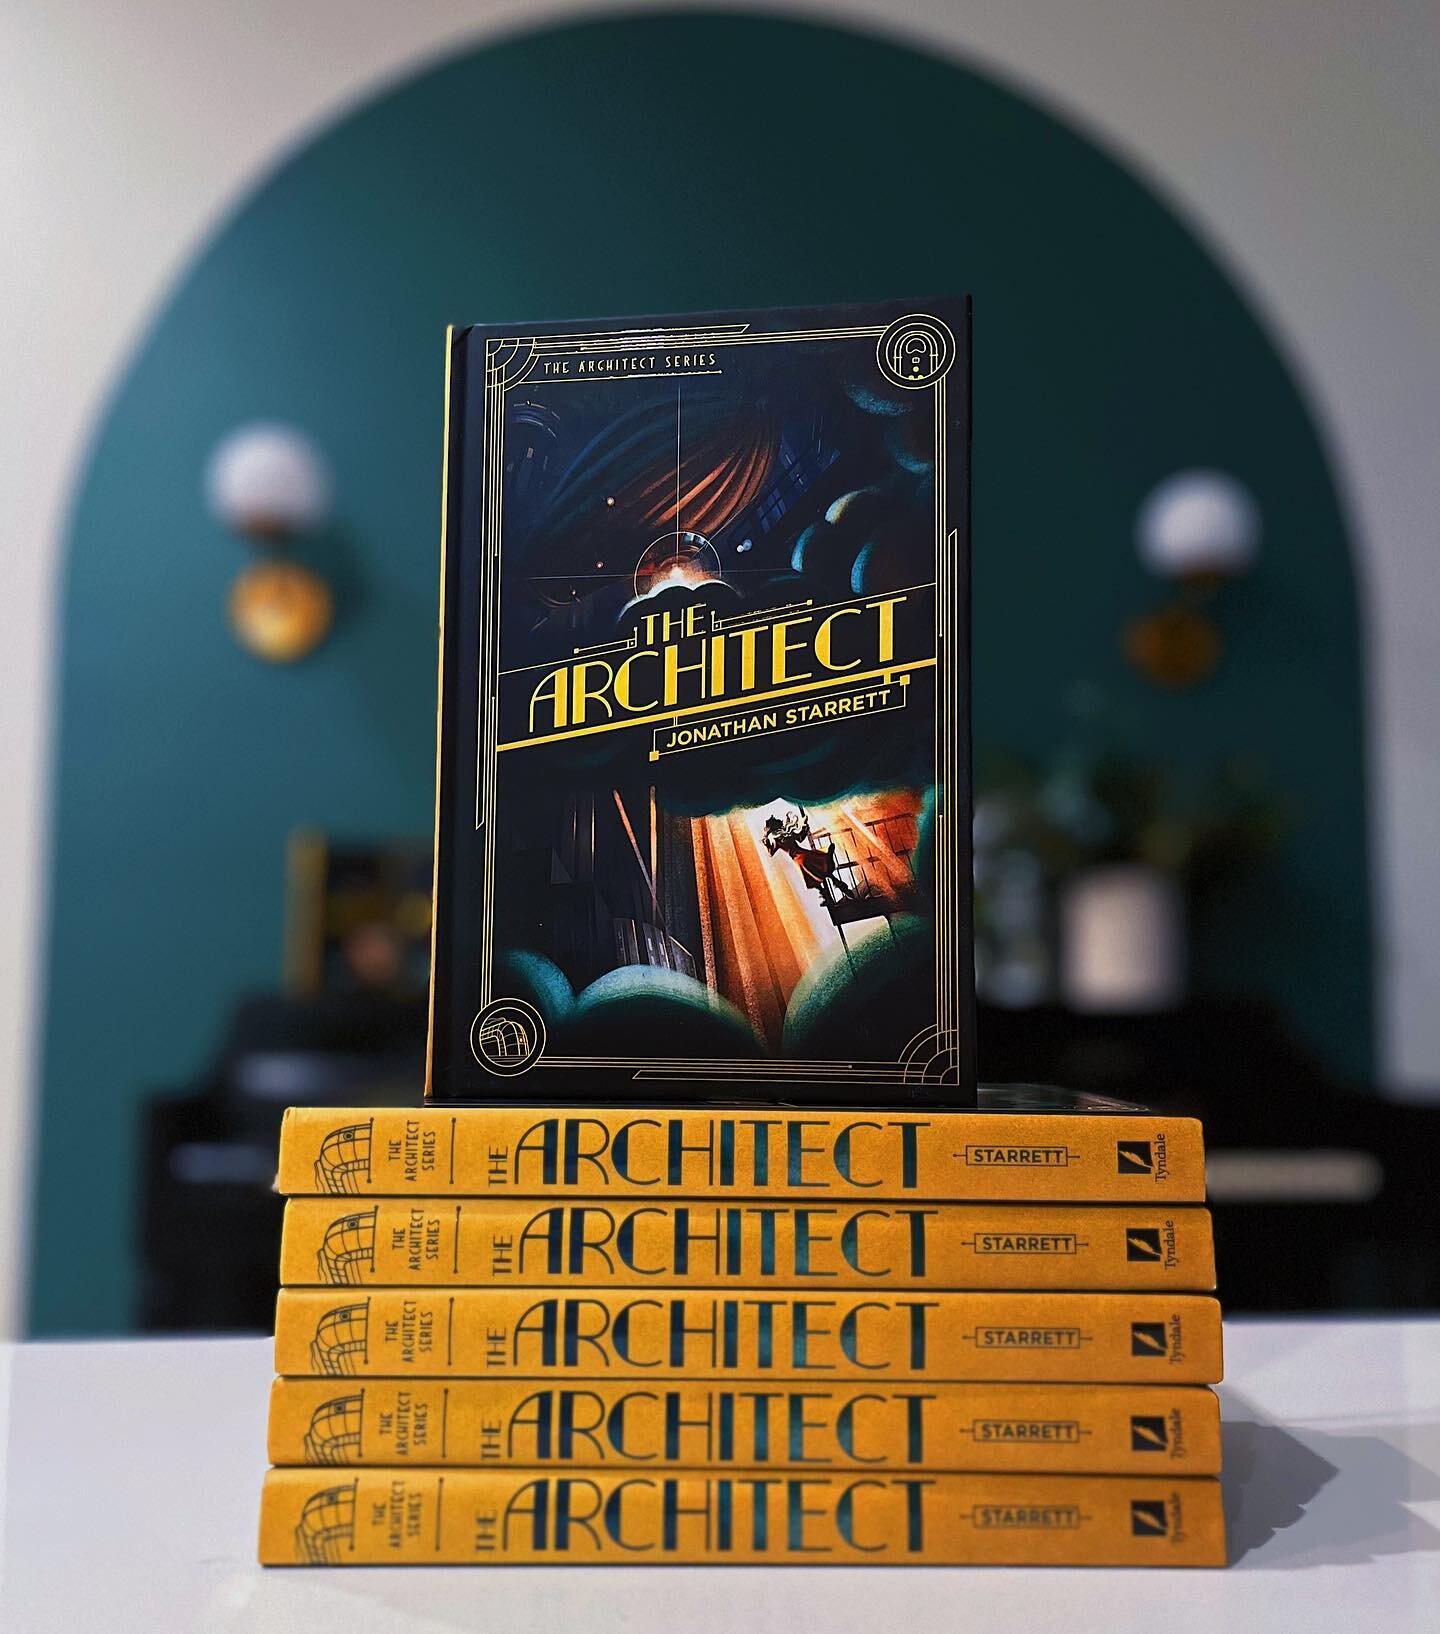 HUGE thanks to everyone who helped put The Architect on several Amazon Best Seller lists!! 🤩

If you haven&rsquo;t yet, it&rsquo;s not too late to join in and pick up your copy at my bio link.

Oh! And don&rsquo;t forget to rate and review the book 